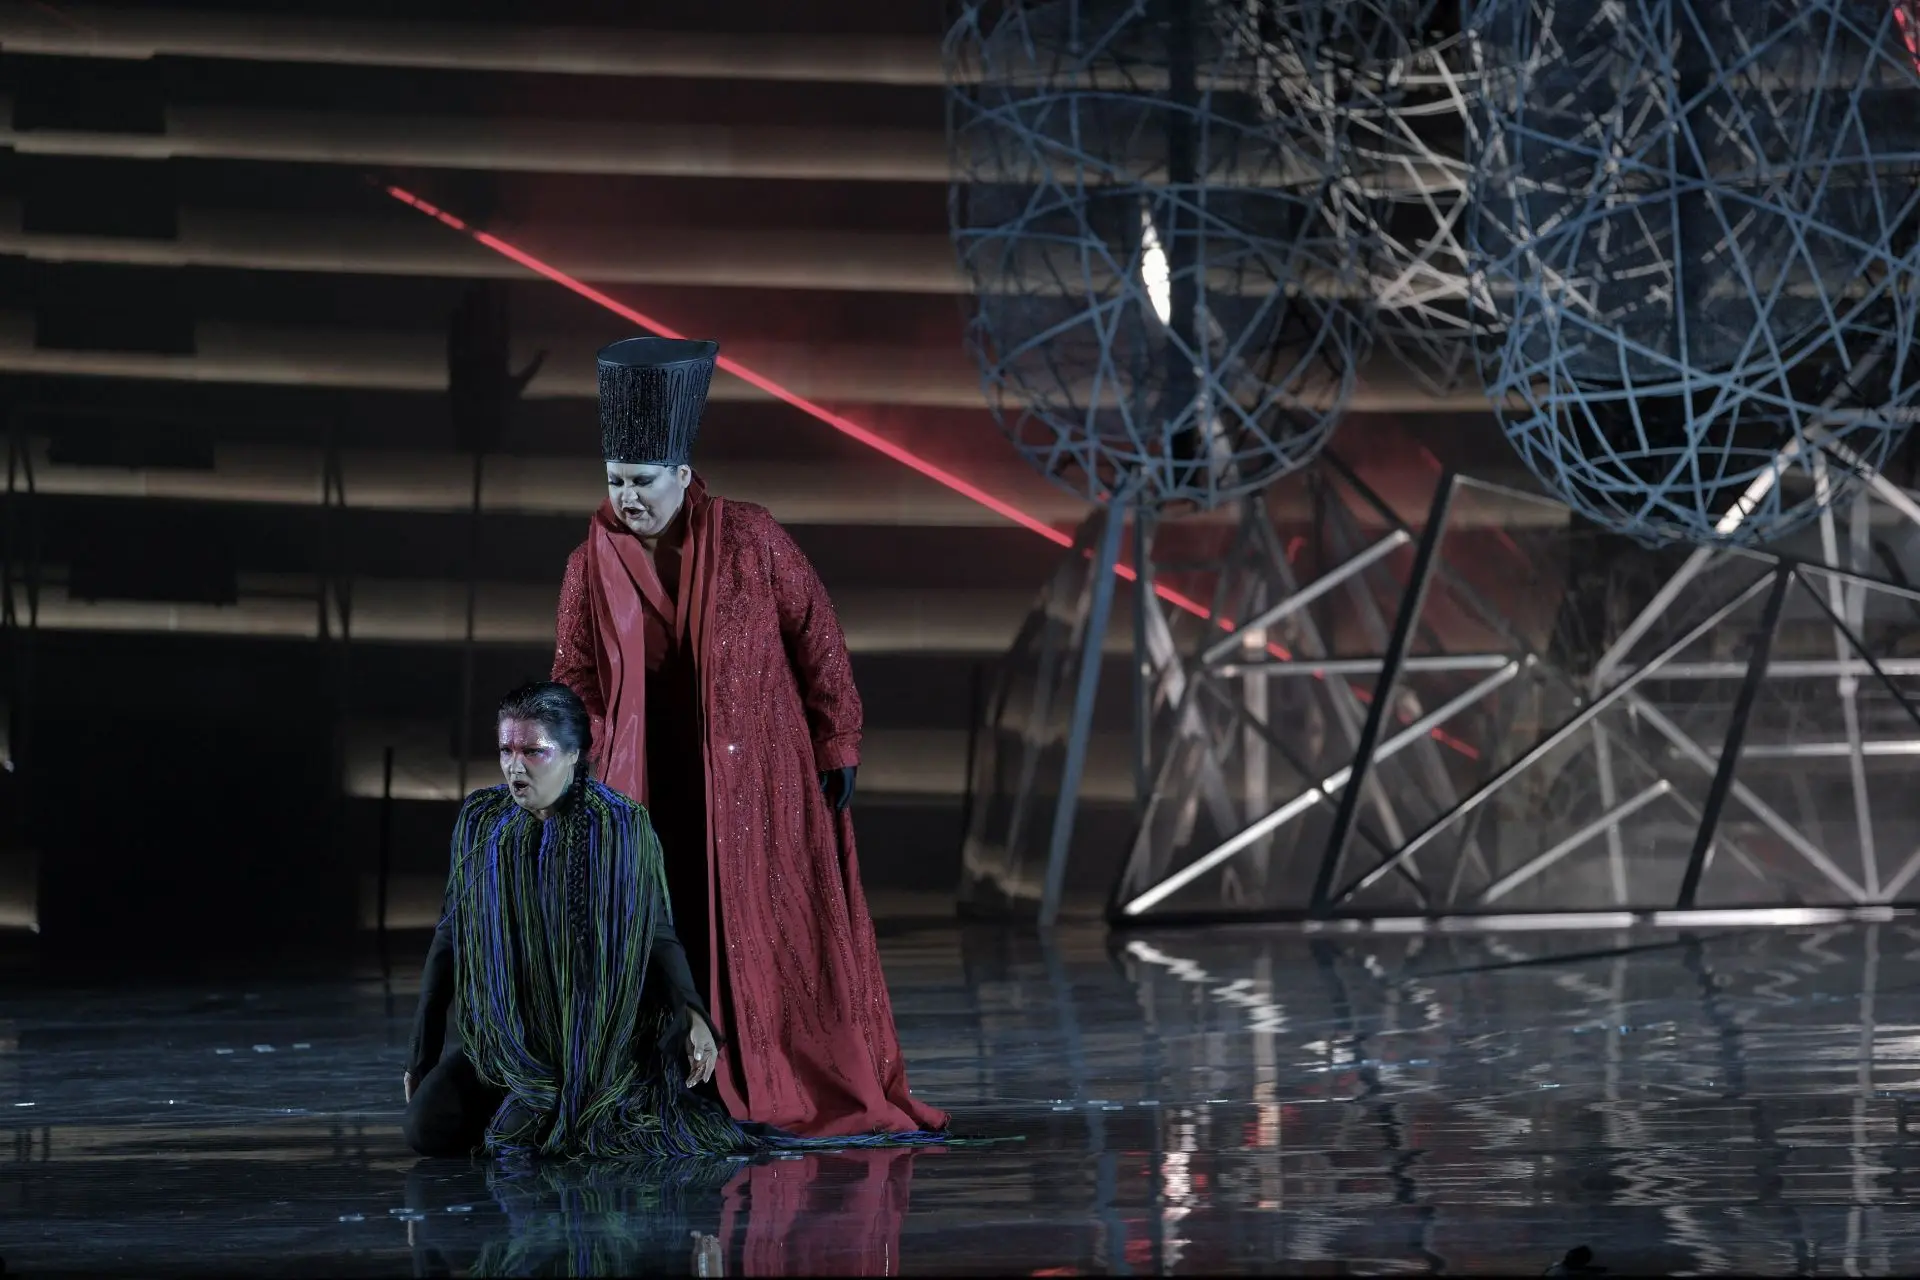 Aida and Amneris, Act II. Aida is on her knees at the center of the stage. Behind her stands Amneris. Aida is wearing a long sleeve black suit, completely covered by a sleeveless robe. The robe has a wide collar with light green, dark green and blue strips. Strings of the same colors fall from the collar covering the figure of Aida to her feet. She has black hair tied in a long braid. She has makeup on her forehead and the sides of her neck are decorated with glitter. Amneris is wearing a floor length Bordeaux robe. It is open in the front and accented with strings of stone of the same color that reflect the light. Underneath she is wearing a floor length Bordeaux suit. On her head, she is wearing a tall, cylindrical, black headdress that widens slightly at the top. It is decorated with strings of black stones. She is also wearing black gloves and black makeup on her eyelids.